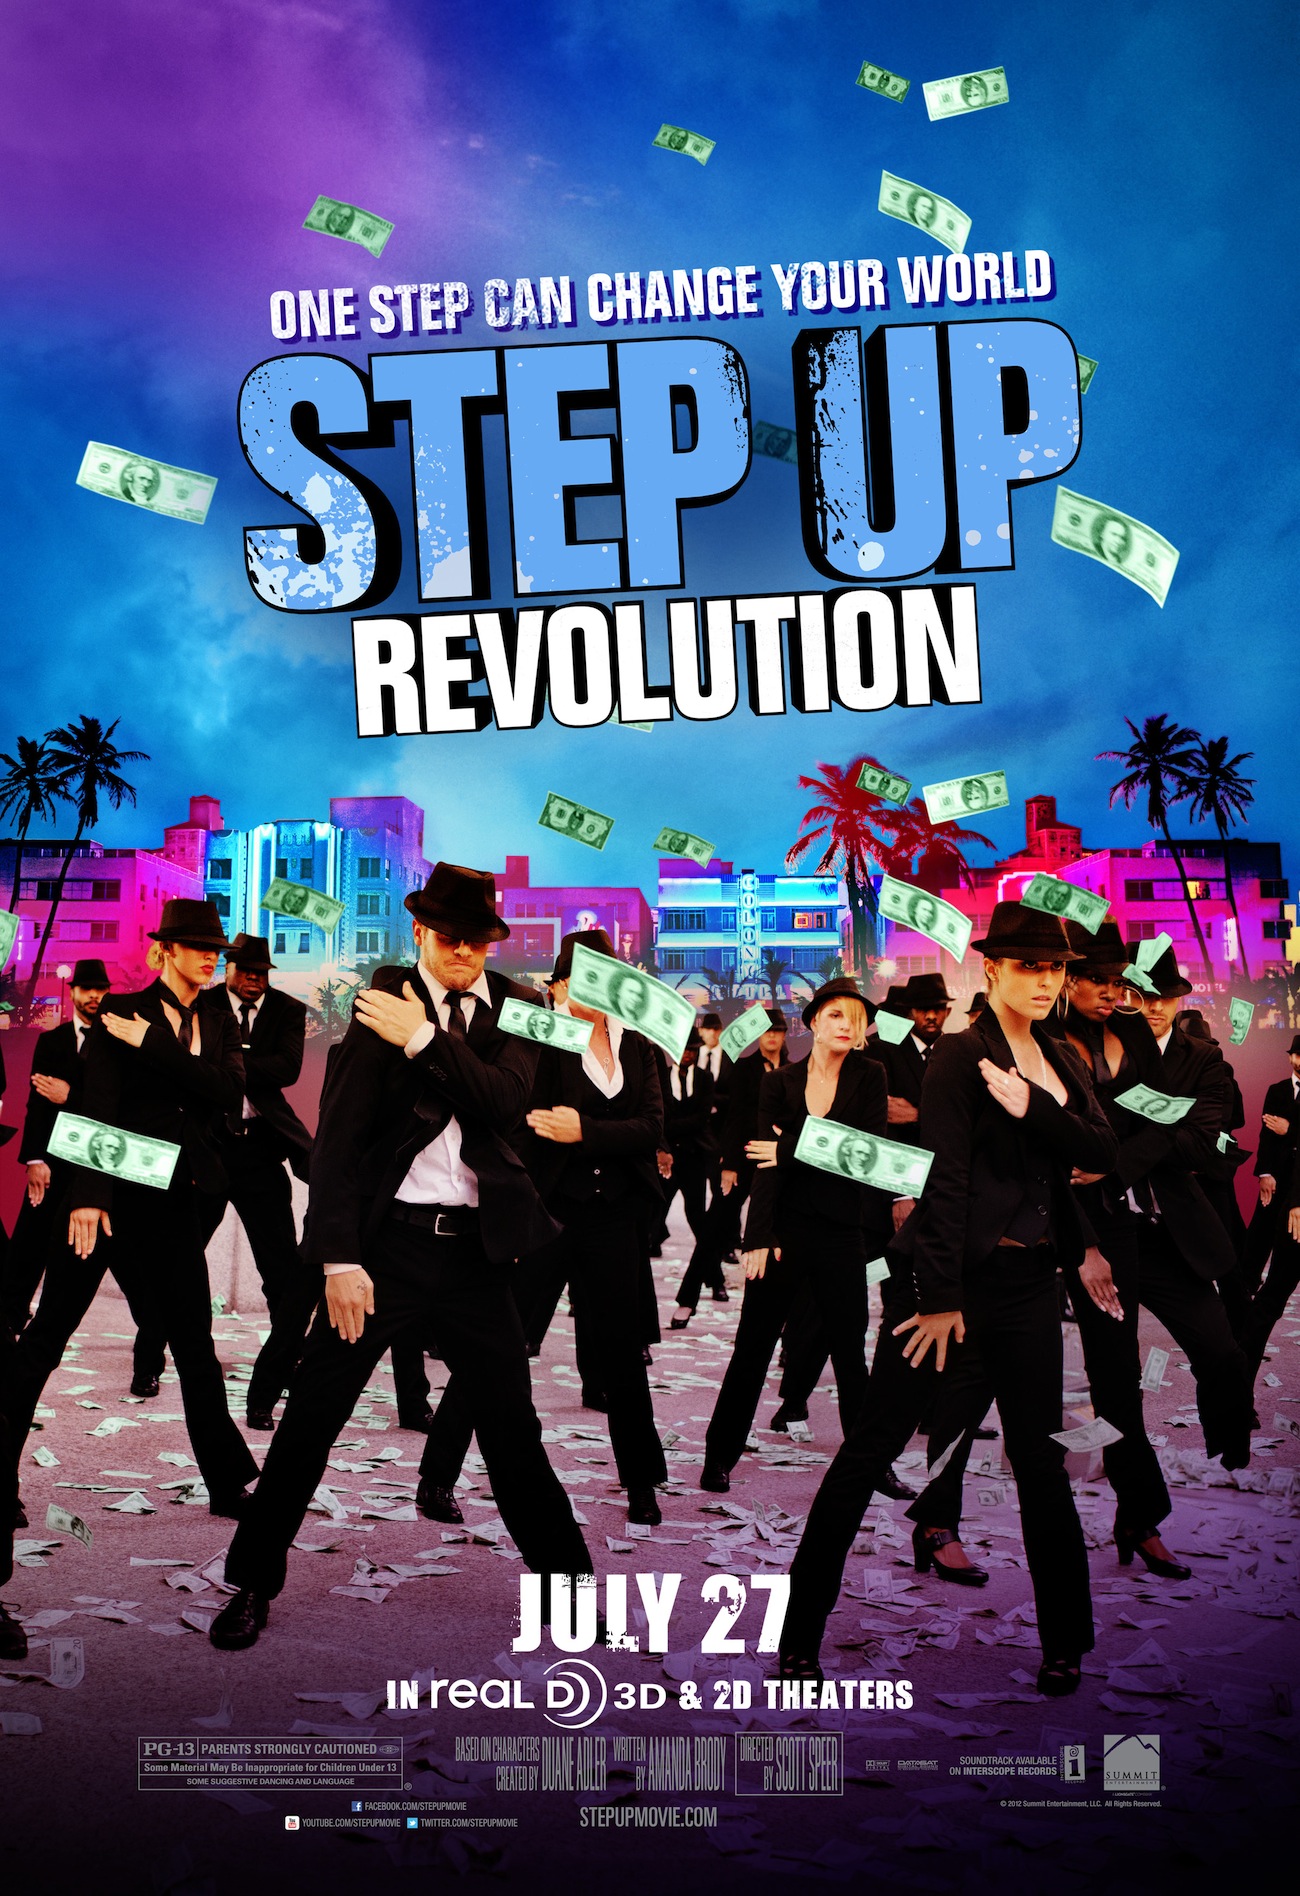 STEP UP 5 Trailer 2 2014 - YouTube